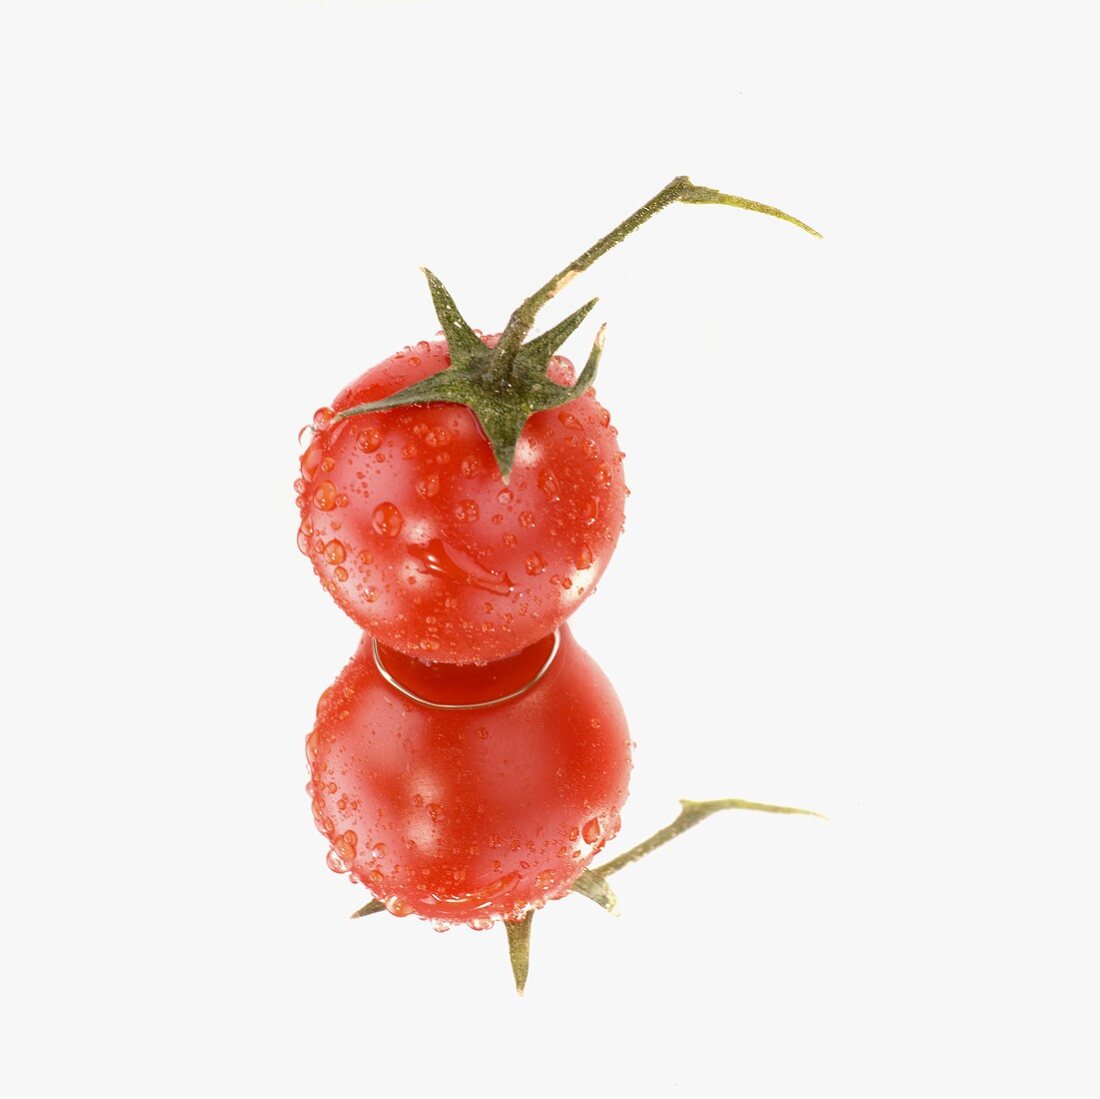 Tomato with drops of water on a mirror